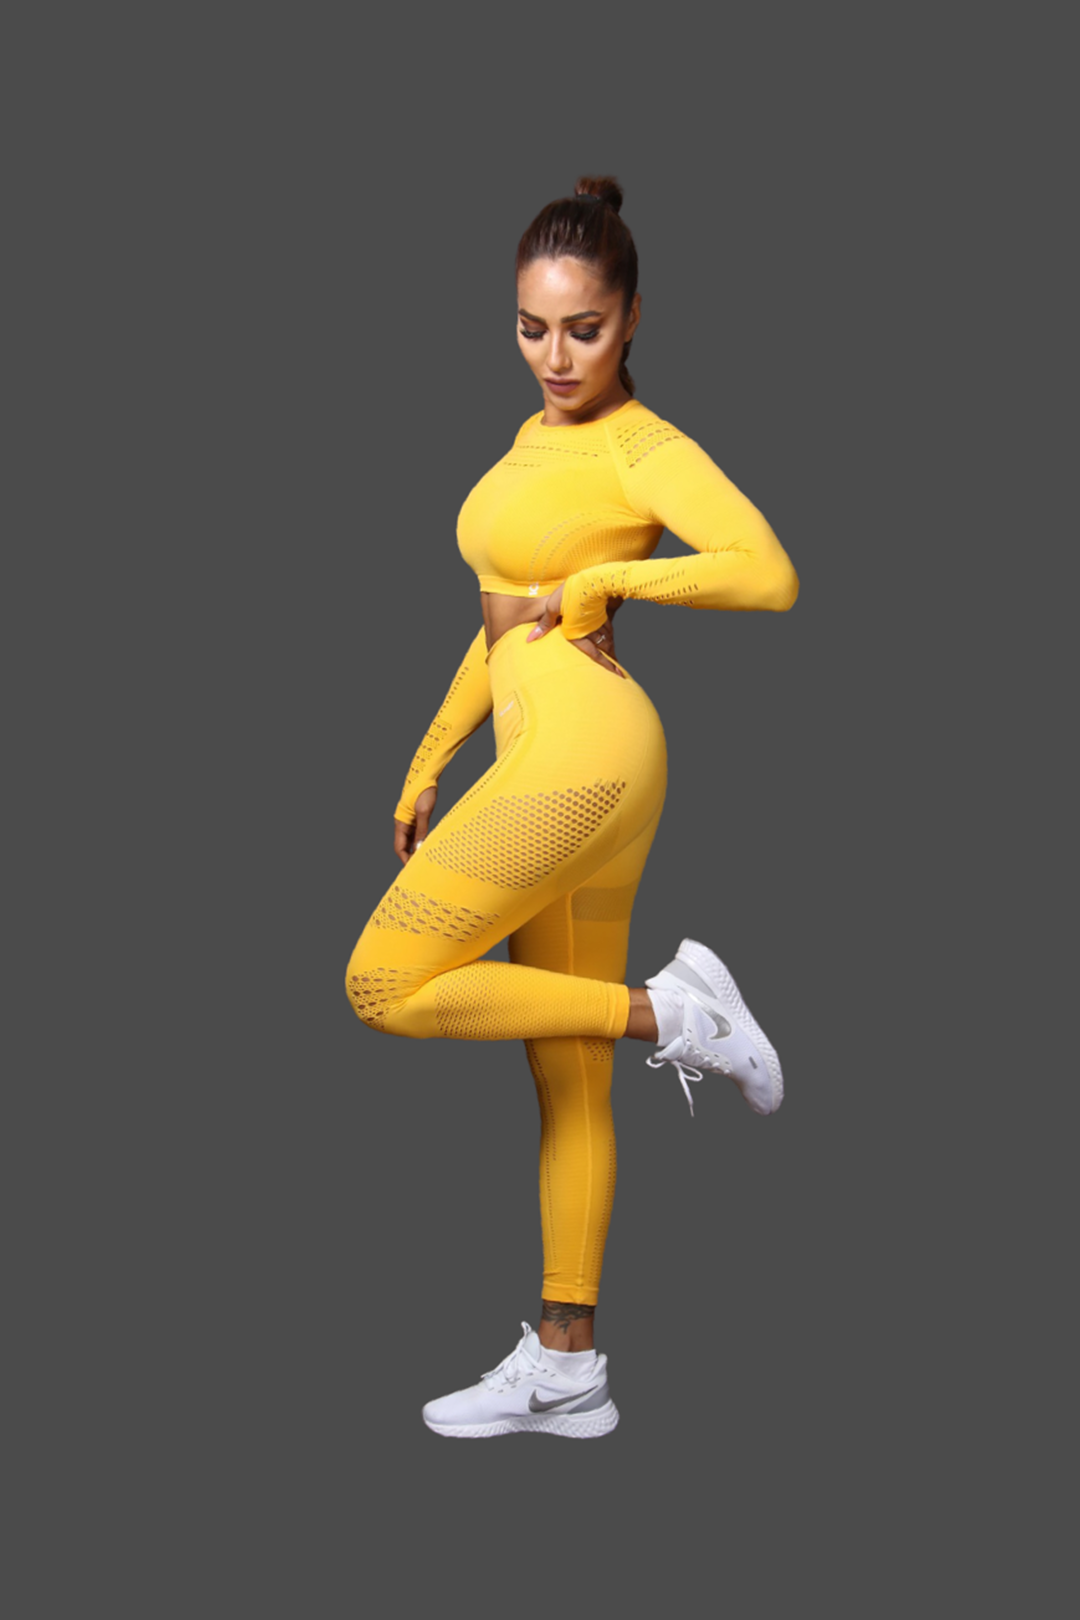 Women's Seamless Workout Outfits for women in Yellow - Buy Now!